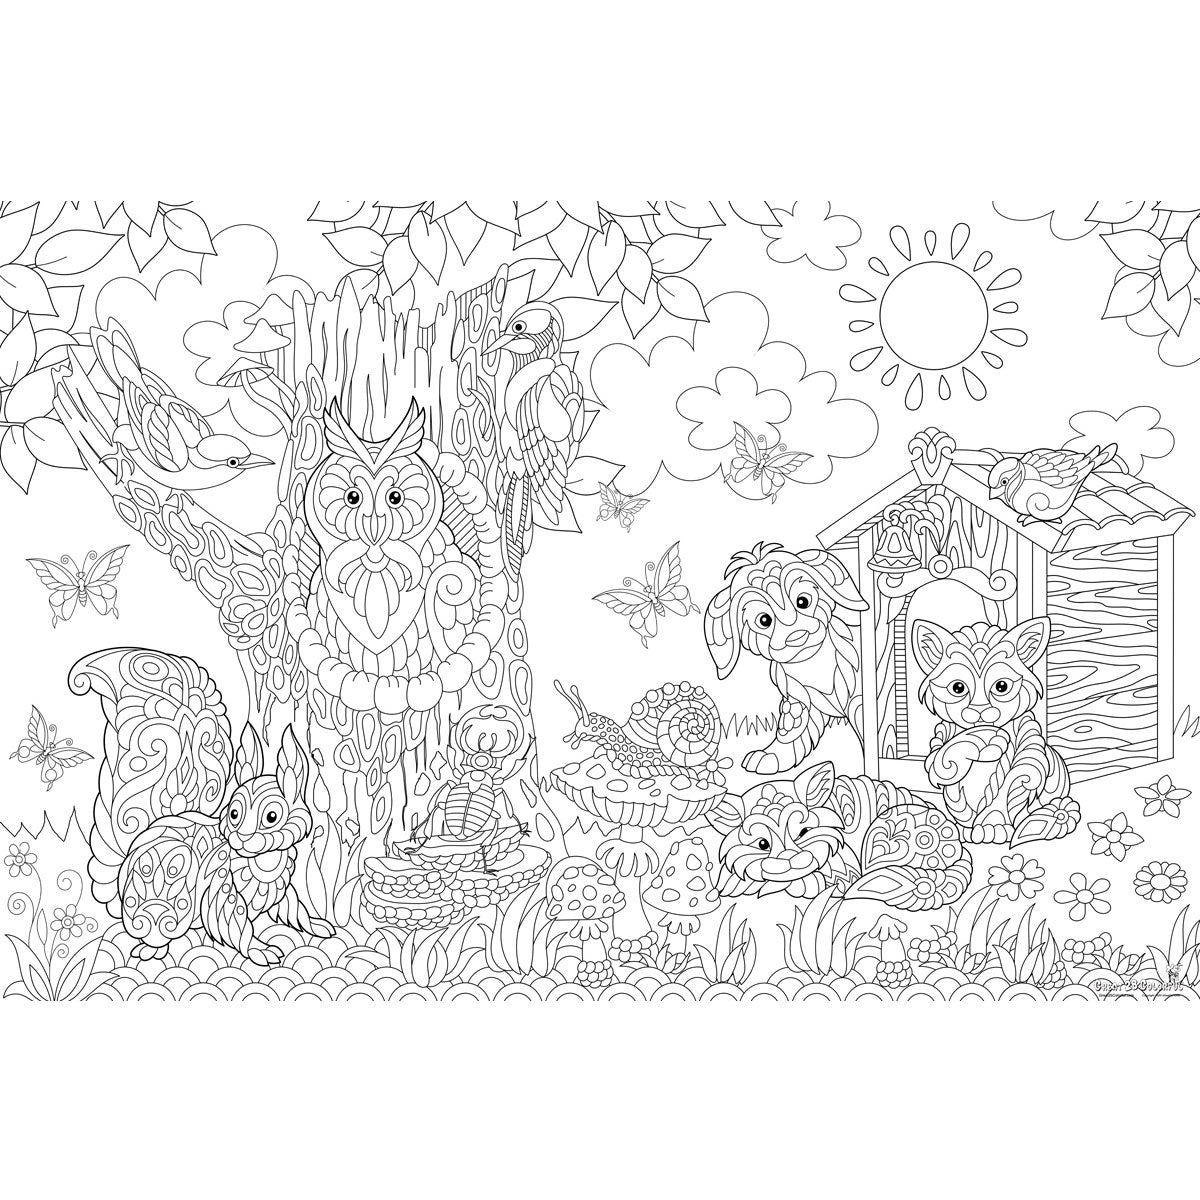 Great2bColorful Coloring Poster - Woodland Friends